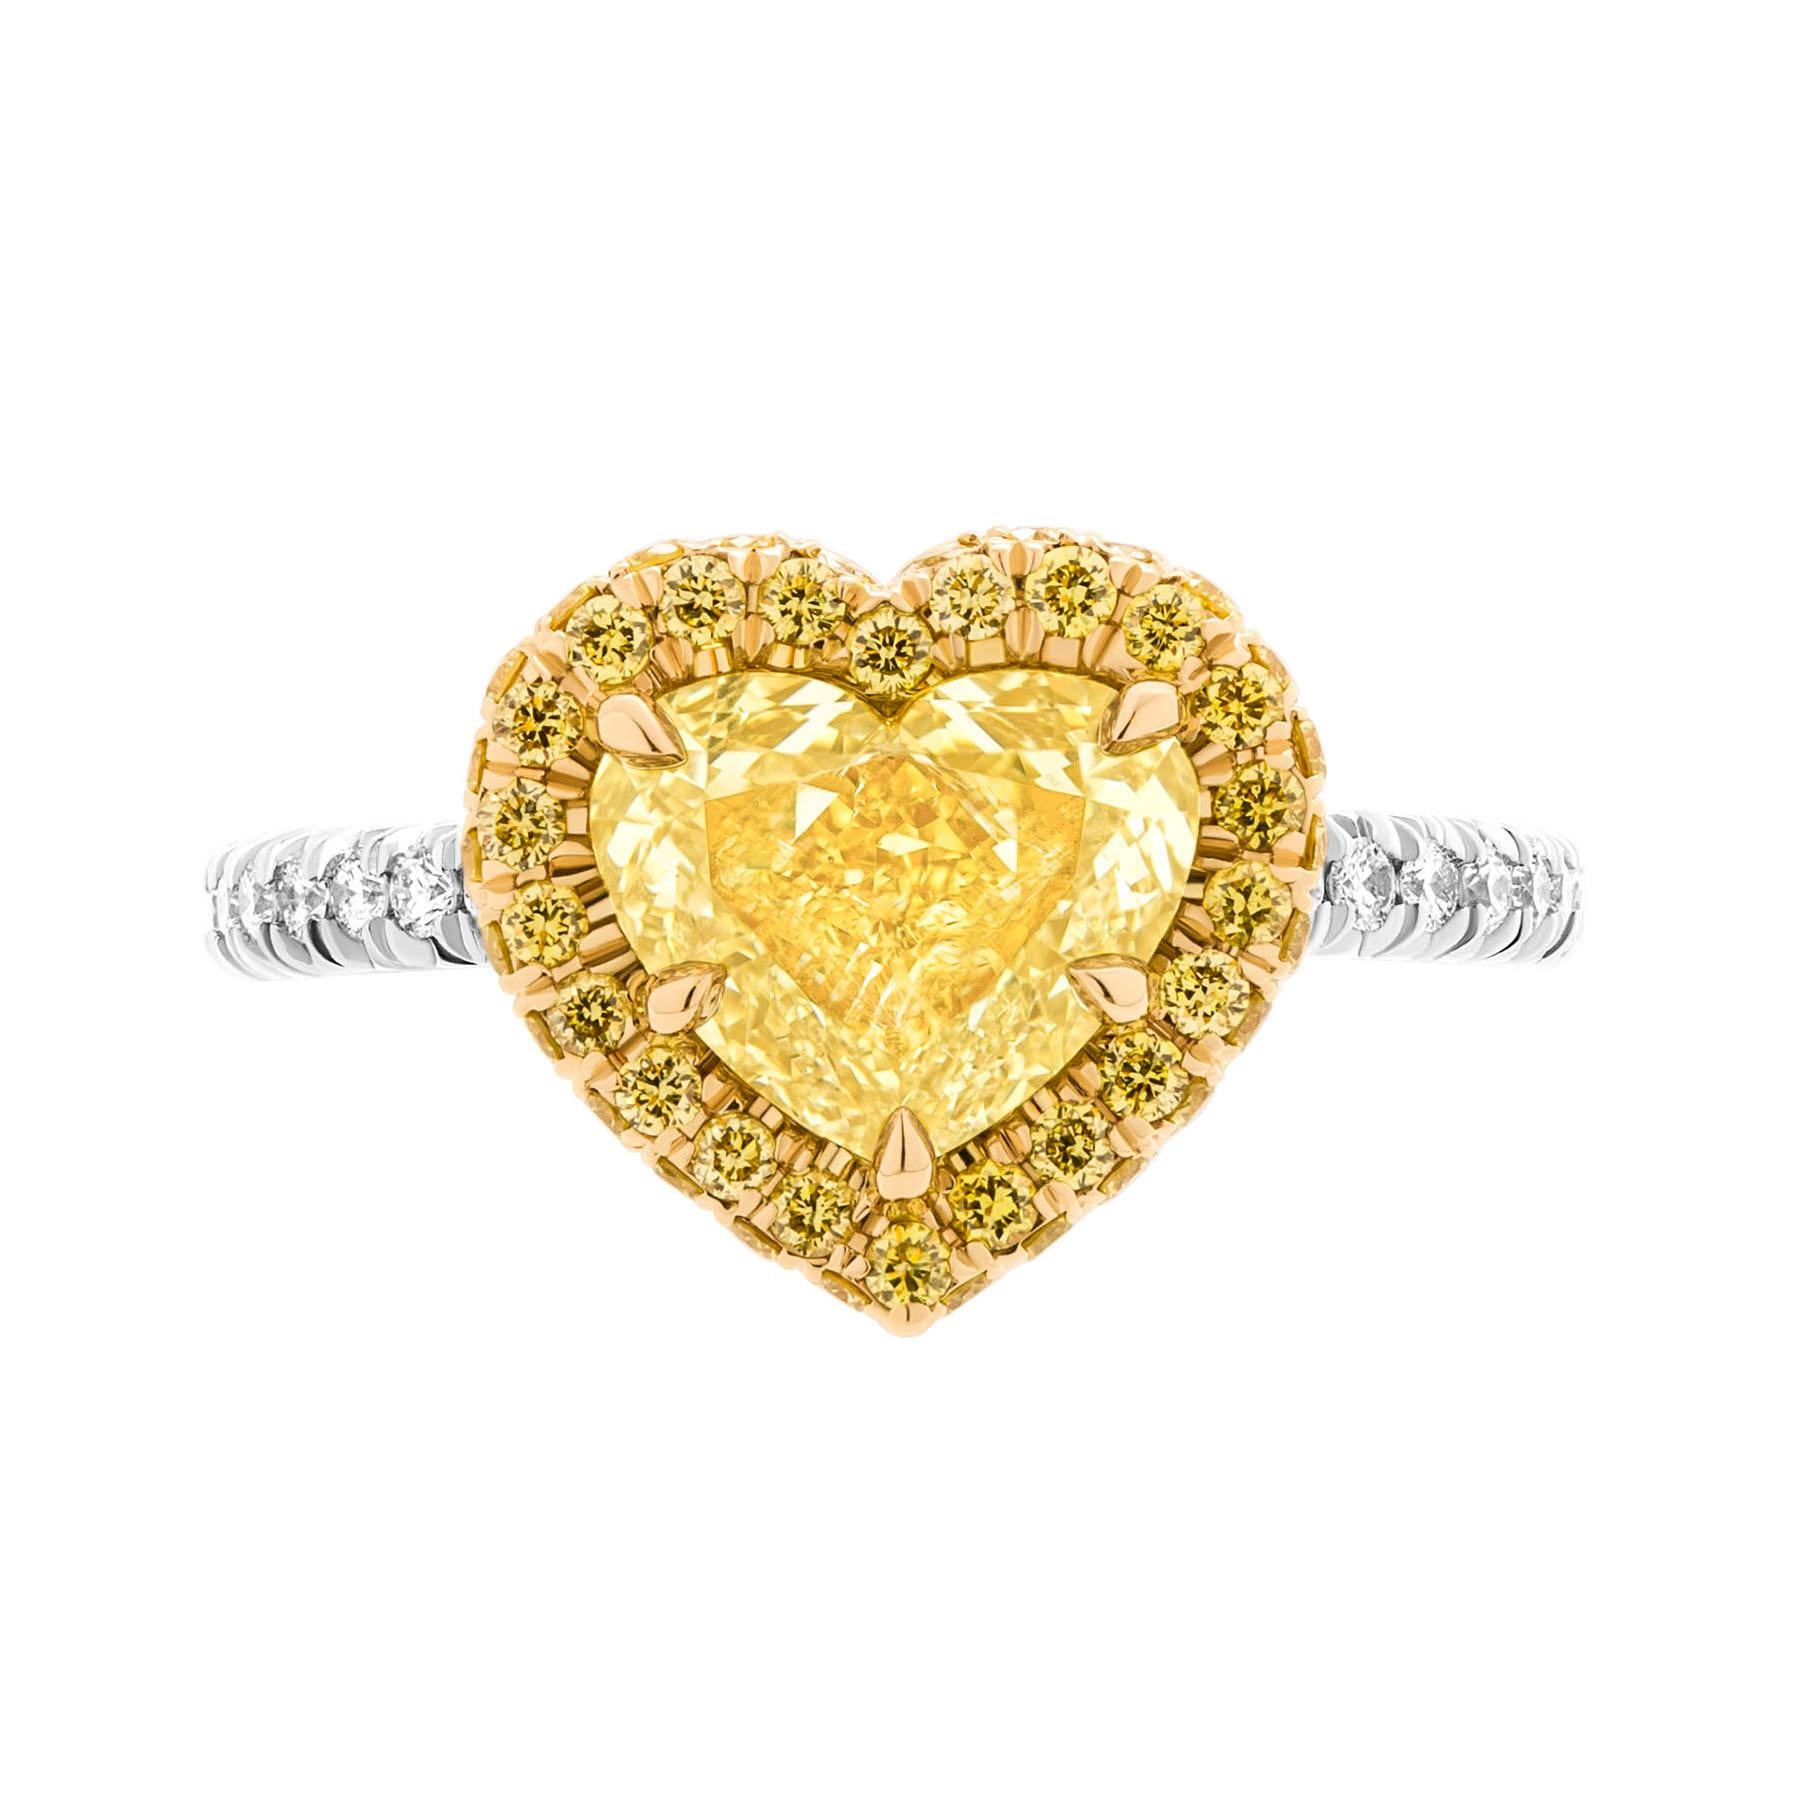 Engagement Ring in 18k Yellow Gold & Platinum  950 
Center stone: 2.01ct Natural Fancy Yellow Even VS2 Heart Shape Diamond GIA#6224501013 
Size:6
Total carat eight of Pave Stones:0.73ct
Featuring diamond shank, diamond stage & double edge halo
